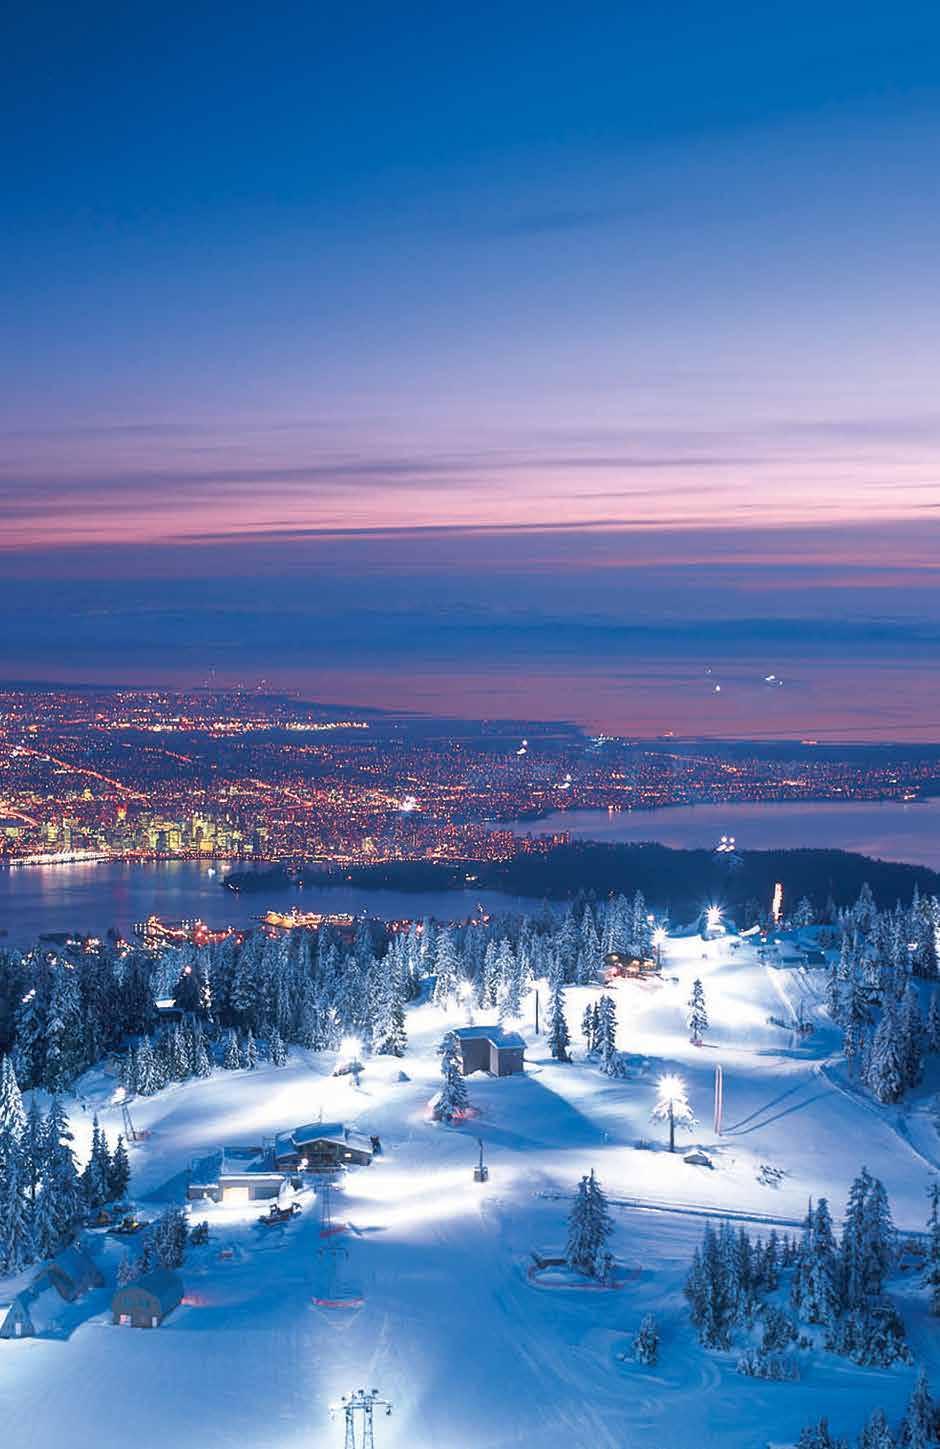 GET THE APP Find out what's happening today on the Mountain. Available on the App Store. grousemountain.com/app GET SNOW ALERTS Text SNOWALERT to 333777 to find out when we have a 10 cm snowfall.